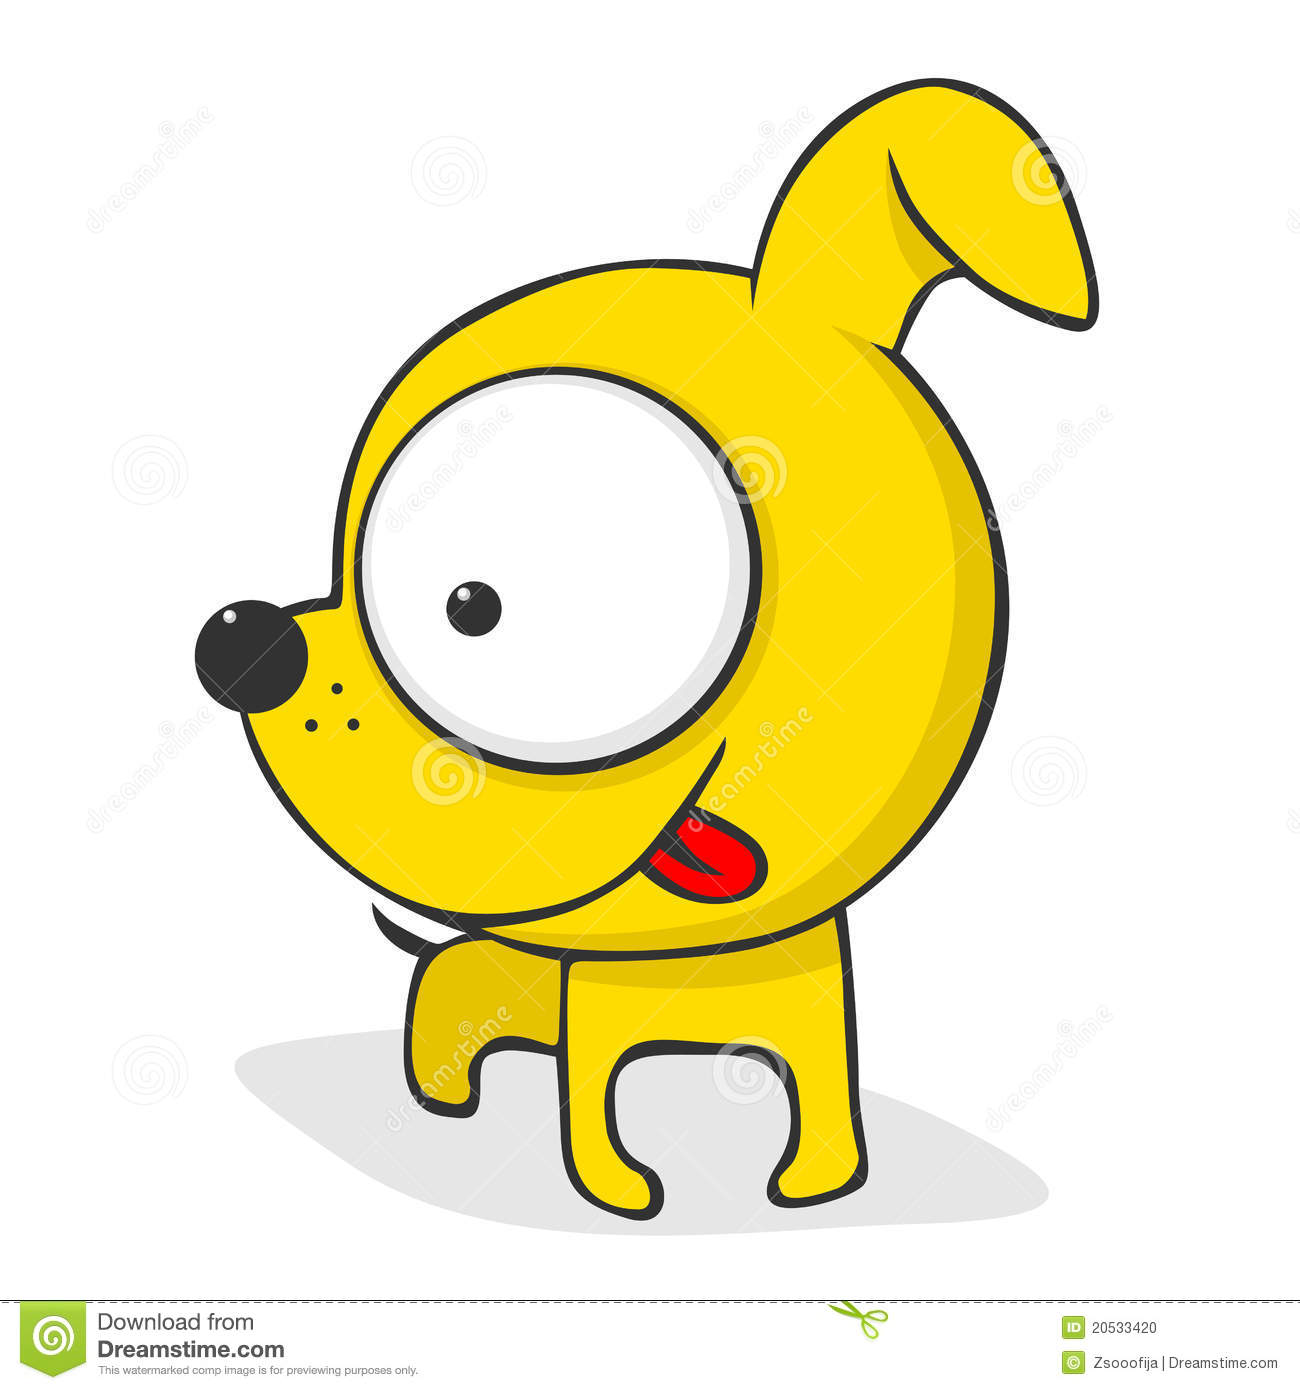 Cute And Funny Cartoon Dog With Huge Eyes - Resimkoy